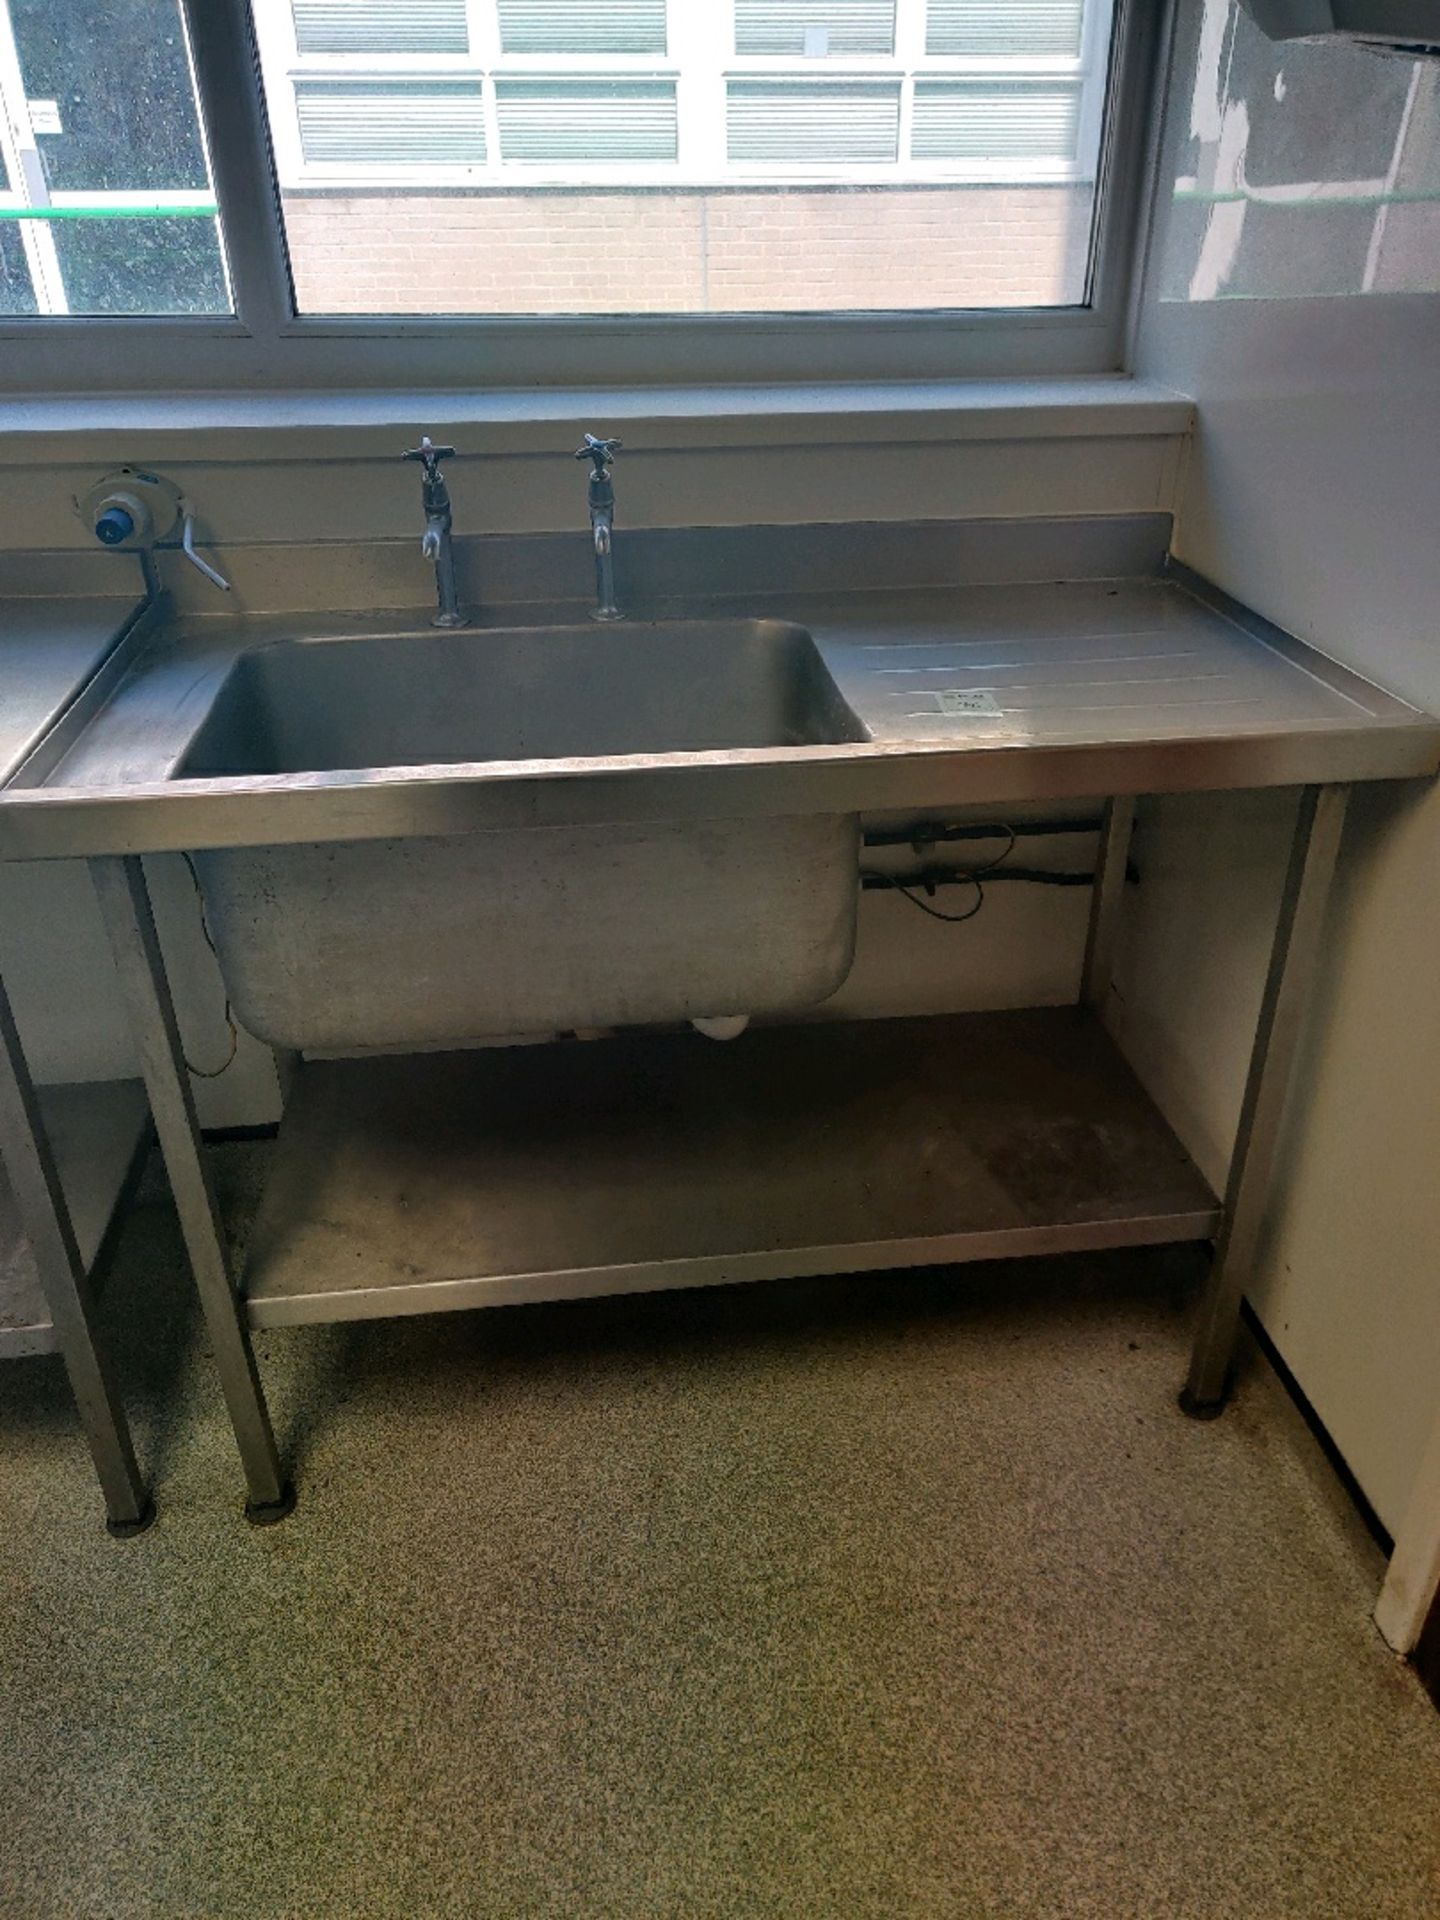 Stainless steel wash area